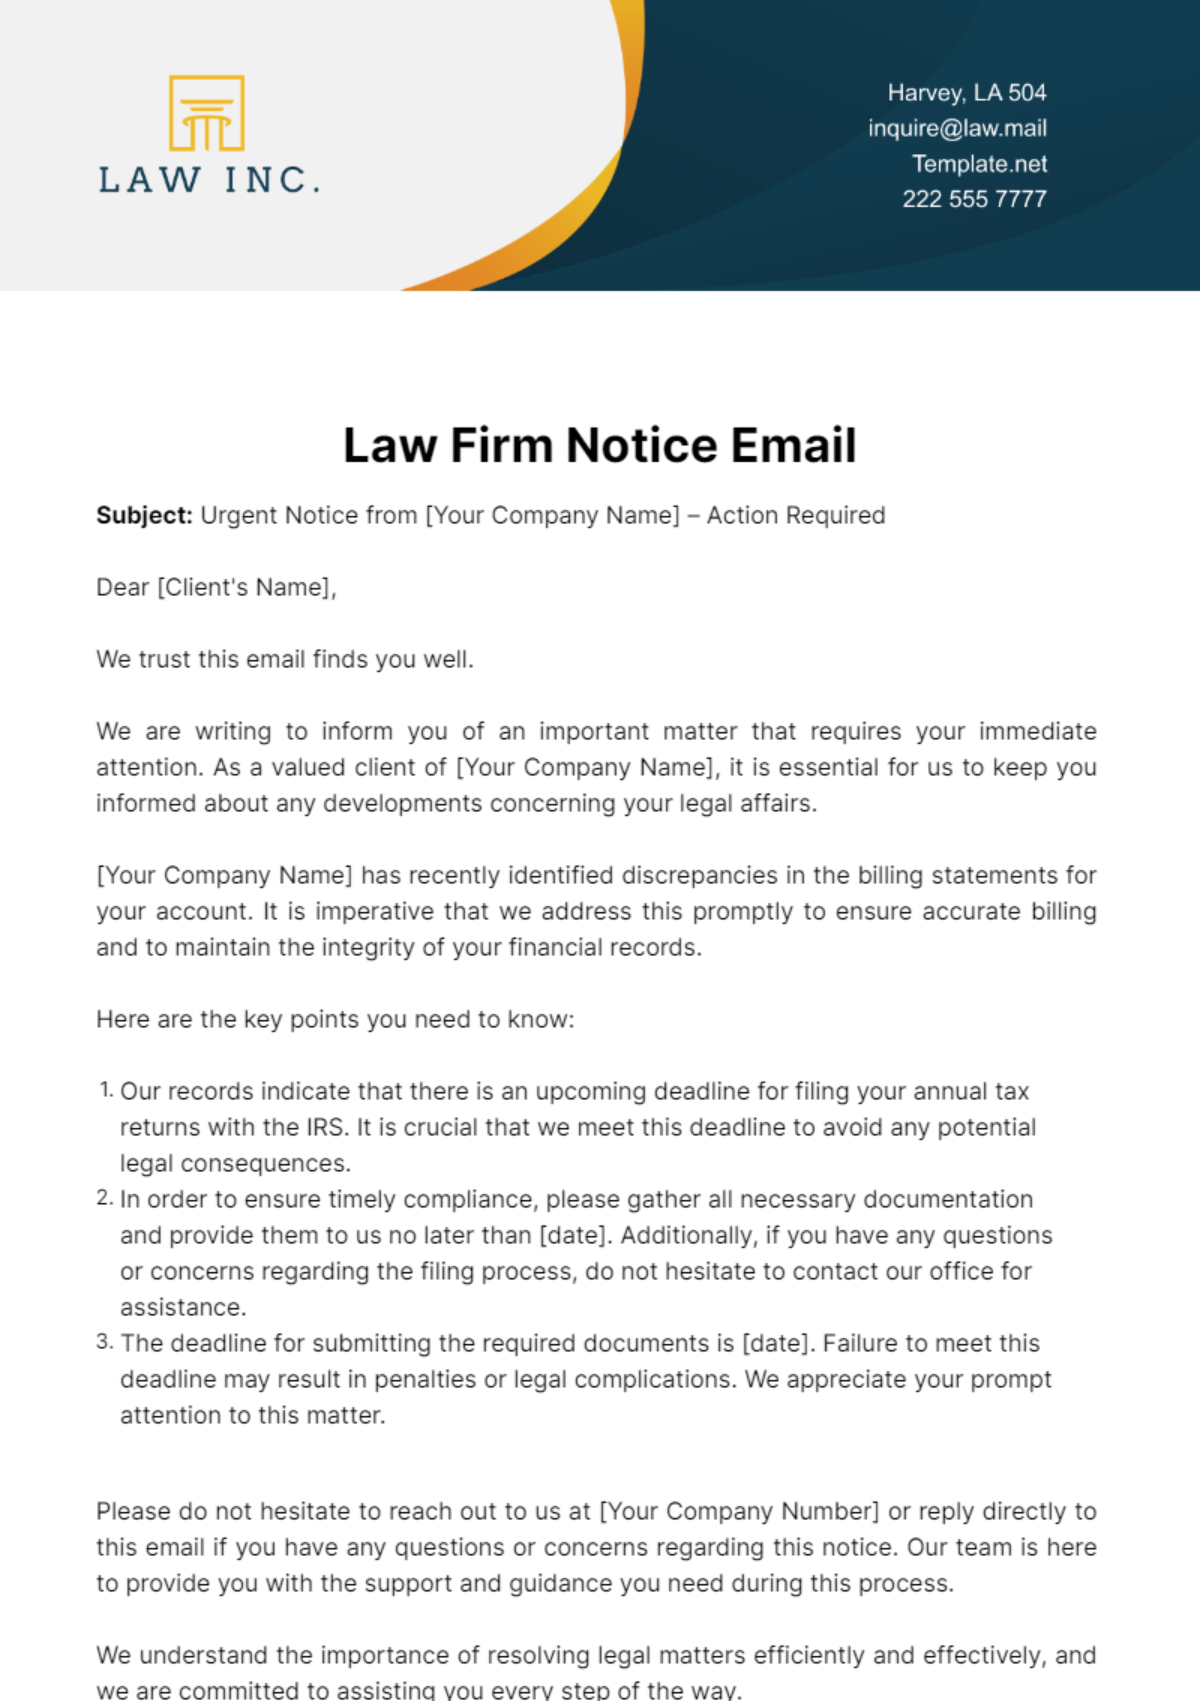 Free Law Firm Notice Email Template